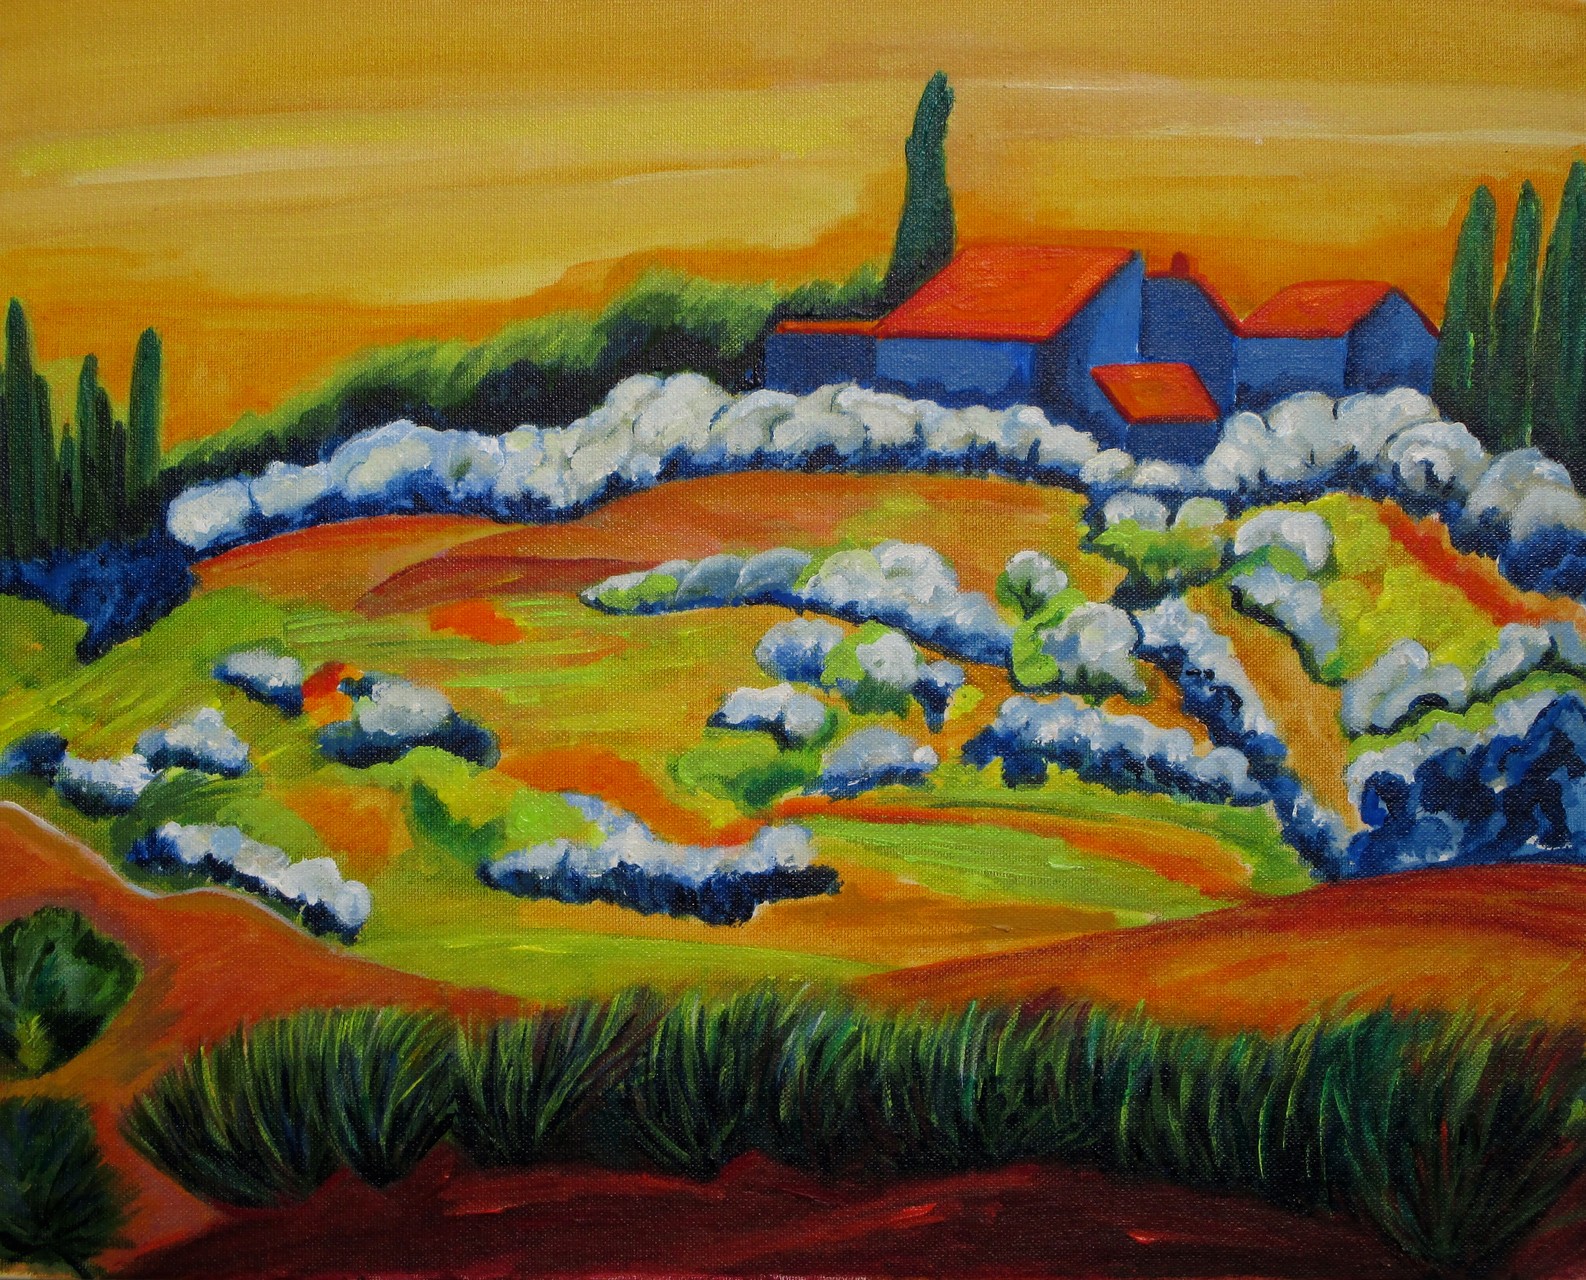 Tuscan Hills, oil on canvas, 20 x 16